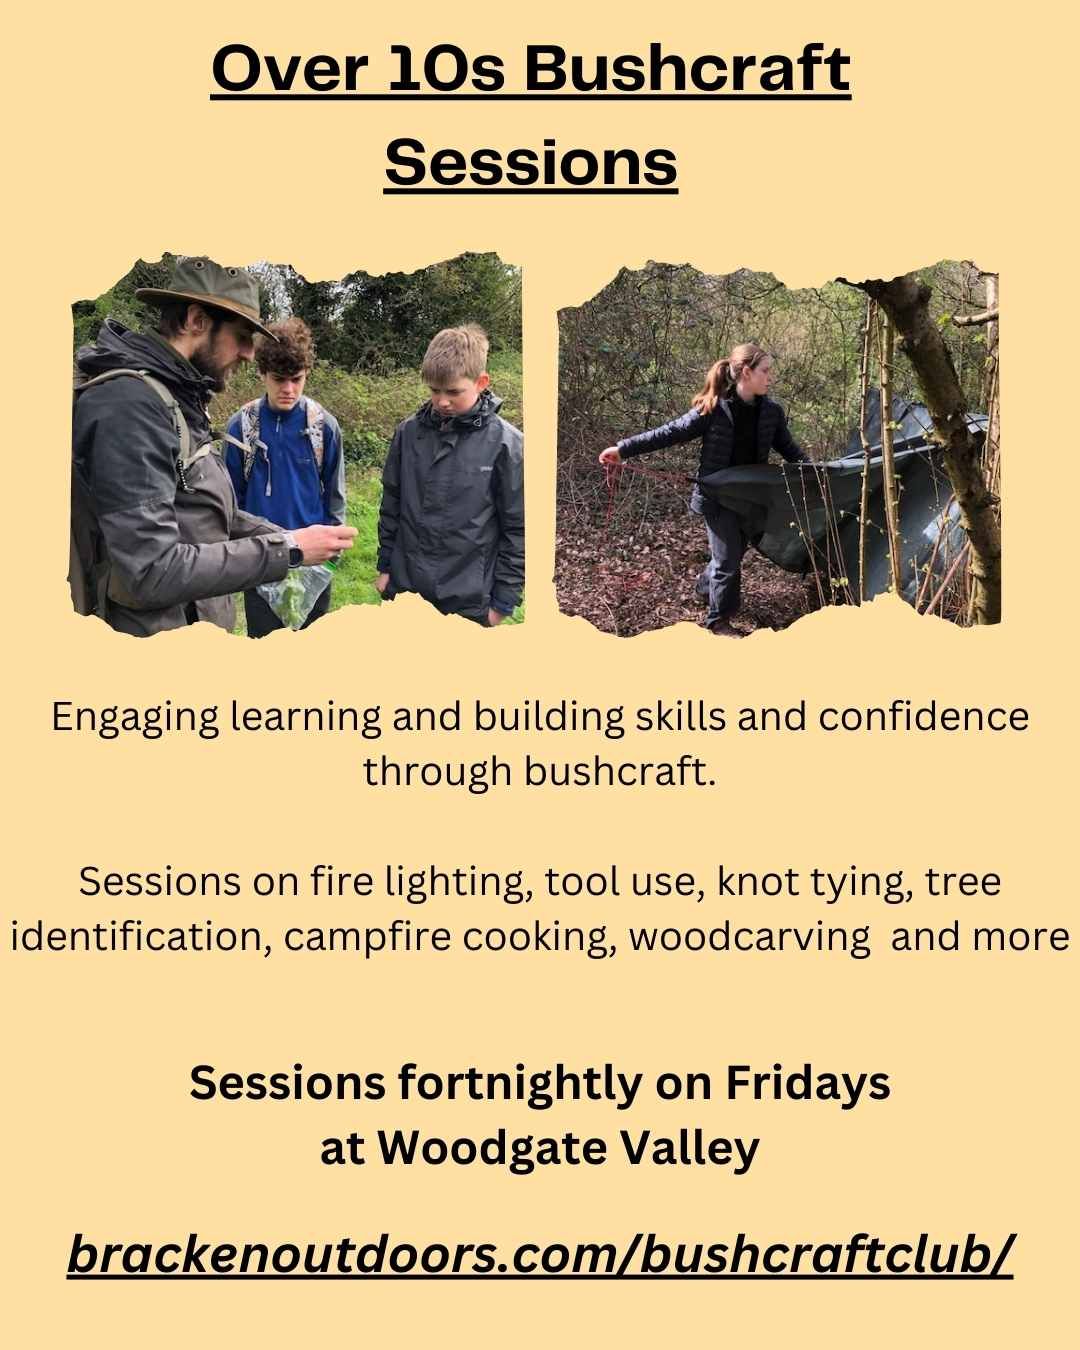 Over 10s Bushcraft at Woodgate Valley